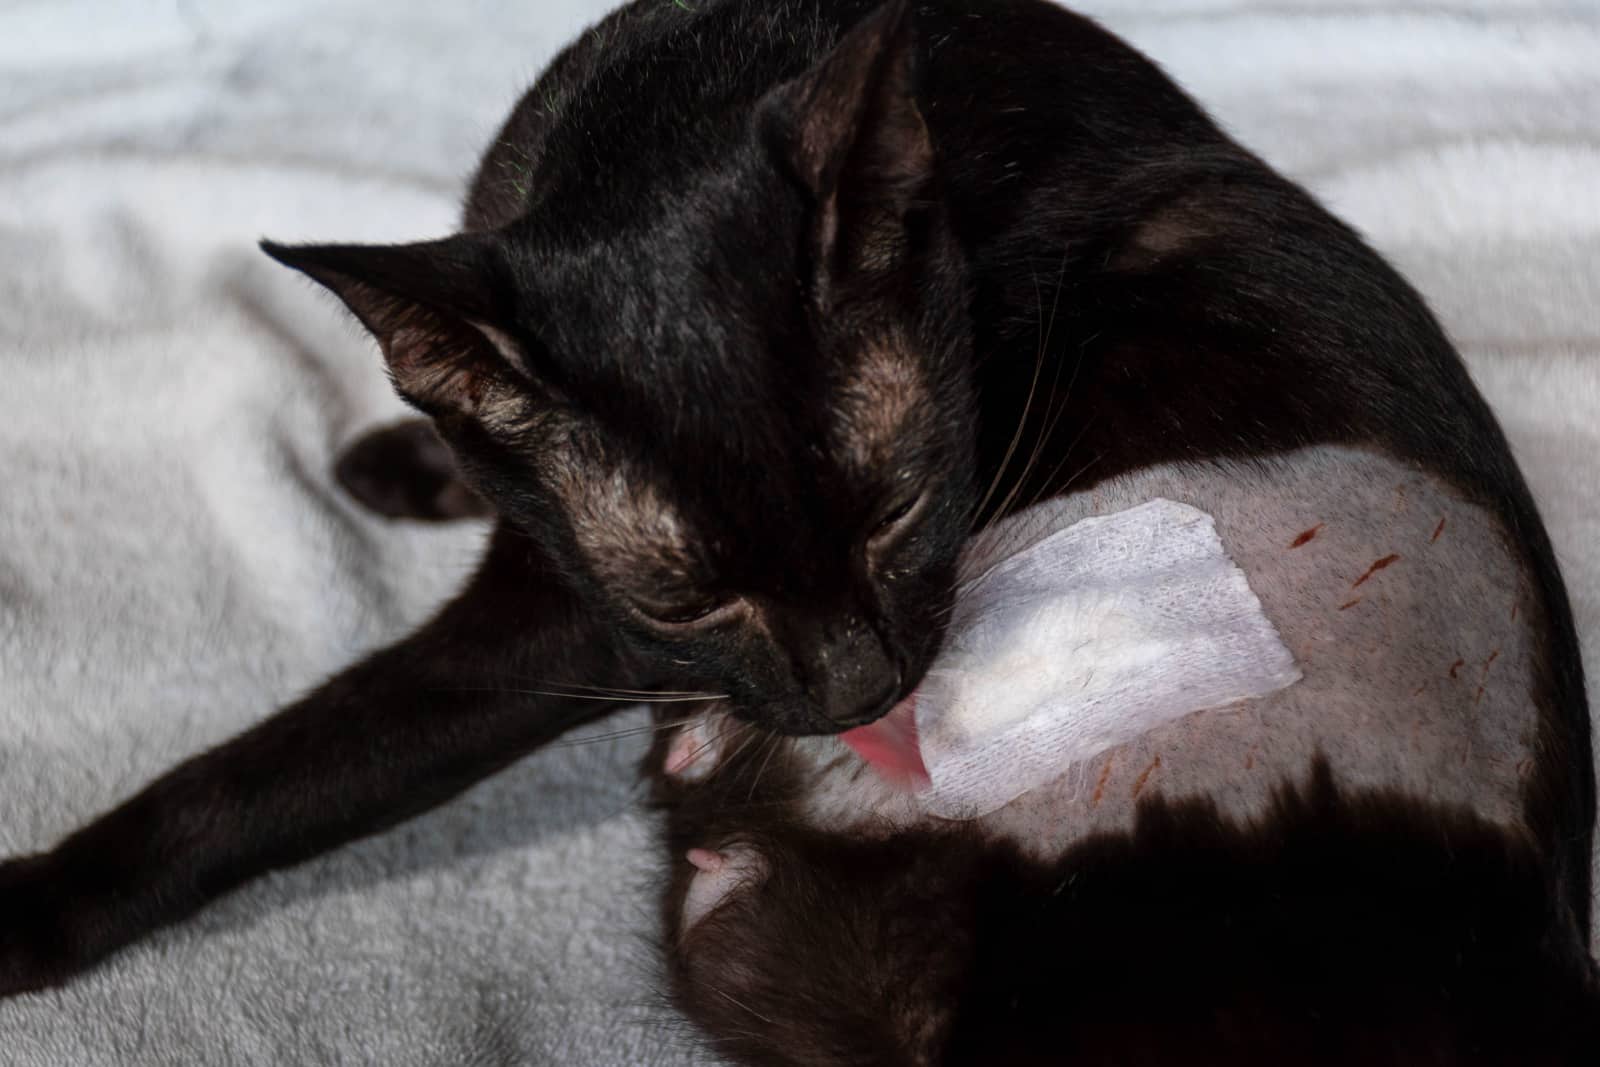 Black cat licking wound from neutering